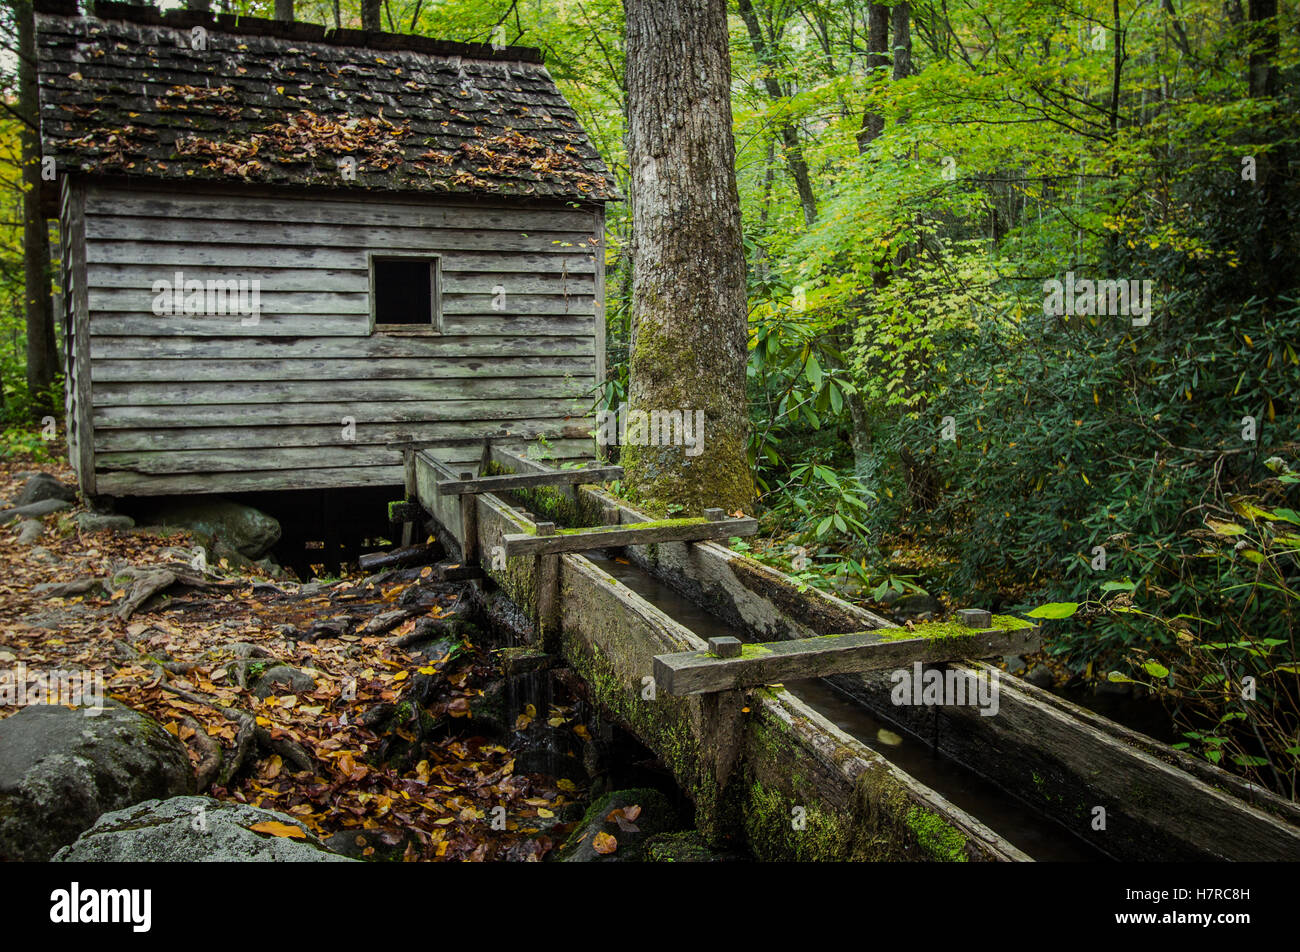 The Old Mill. Small historical mill on the roadside in Gatlinburg, Tennessee on the Roaring Fork Motor Nature Trail. Stock Photo